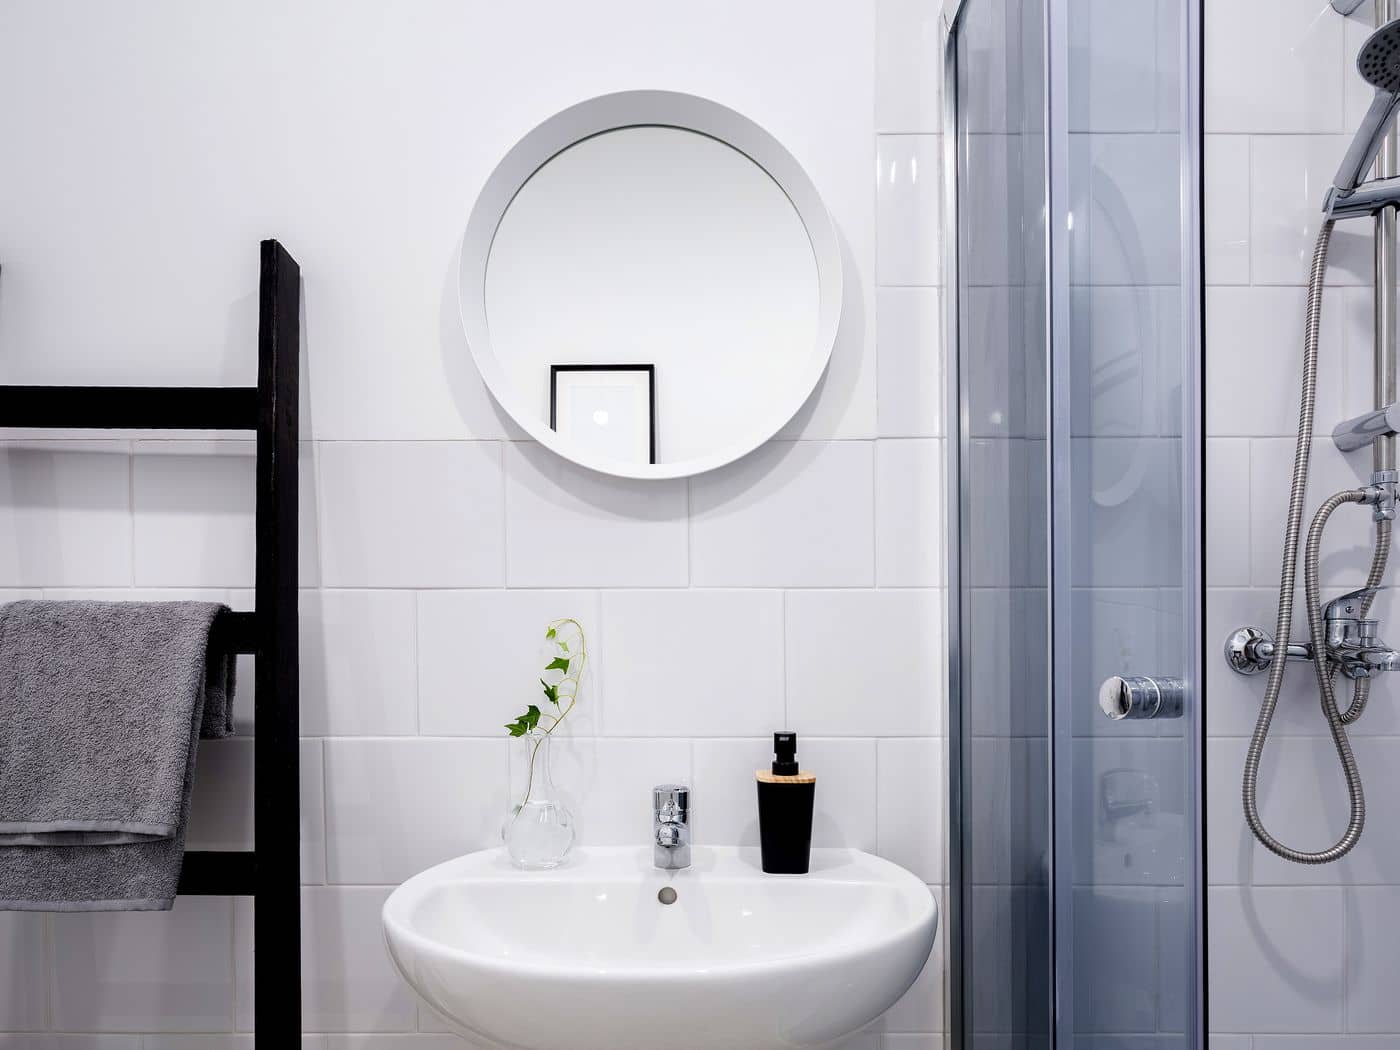 Should You Let Home Contractors Use Your Restroom?